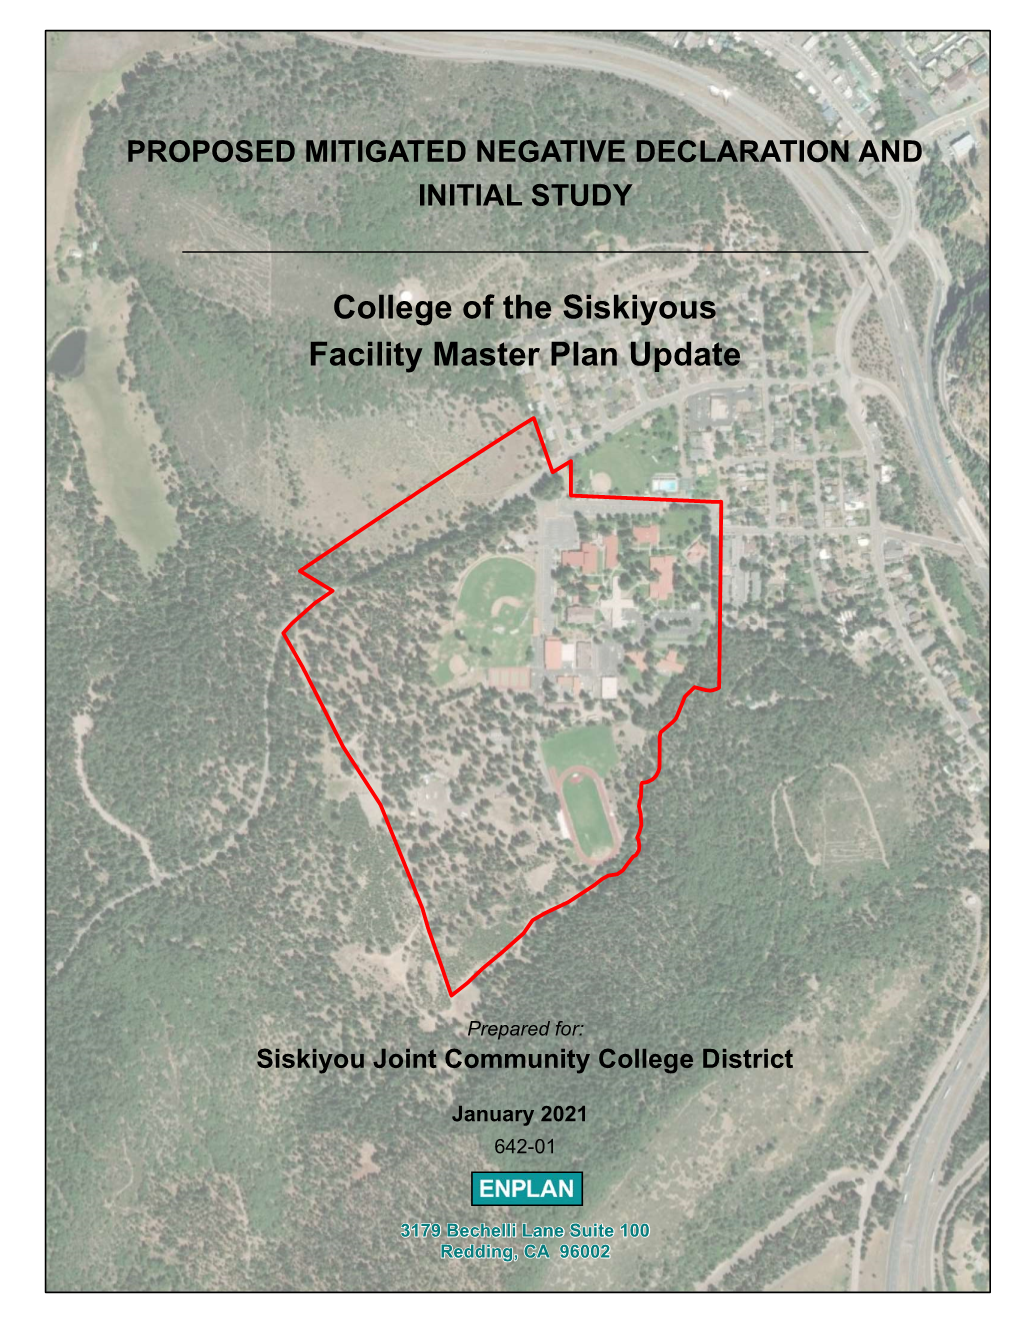 College of the Siskiyous Facility Master Plan Update